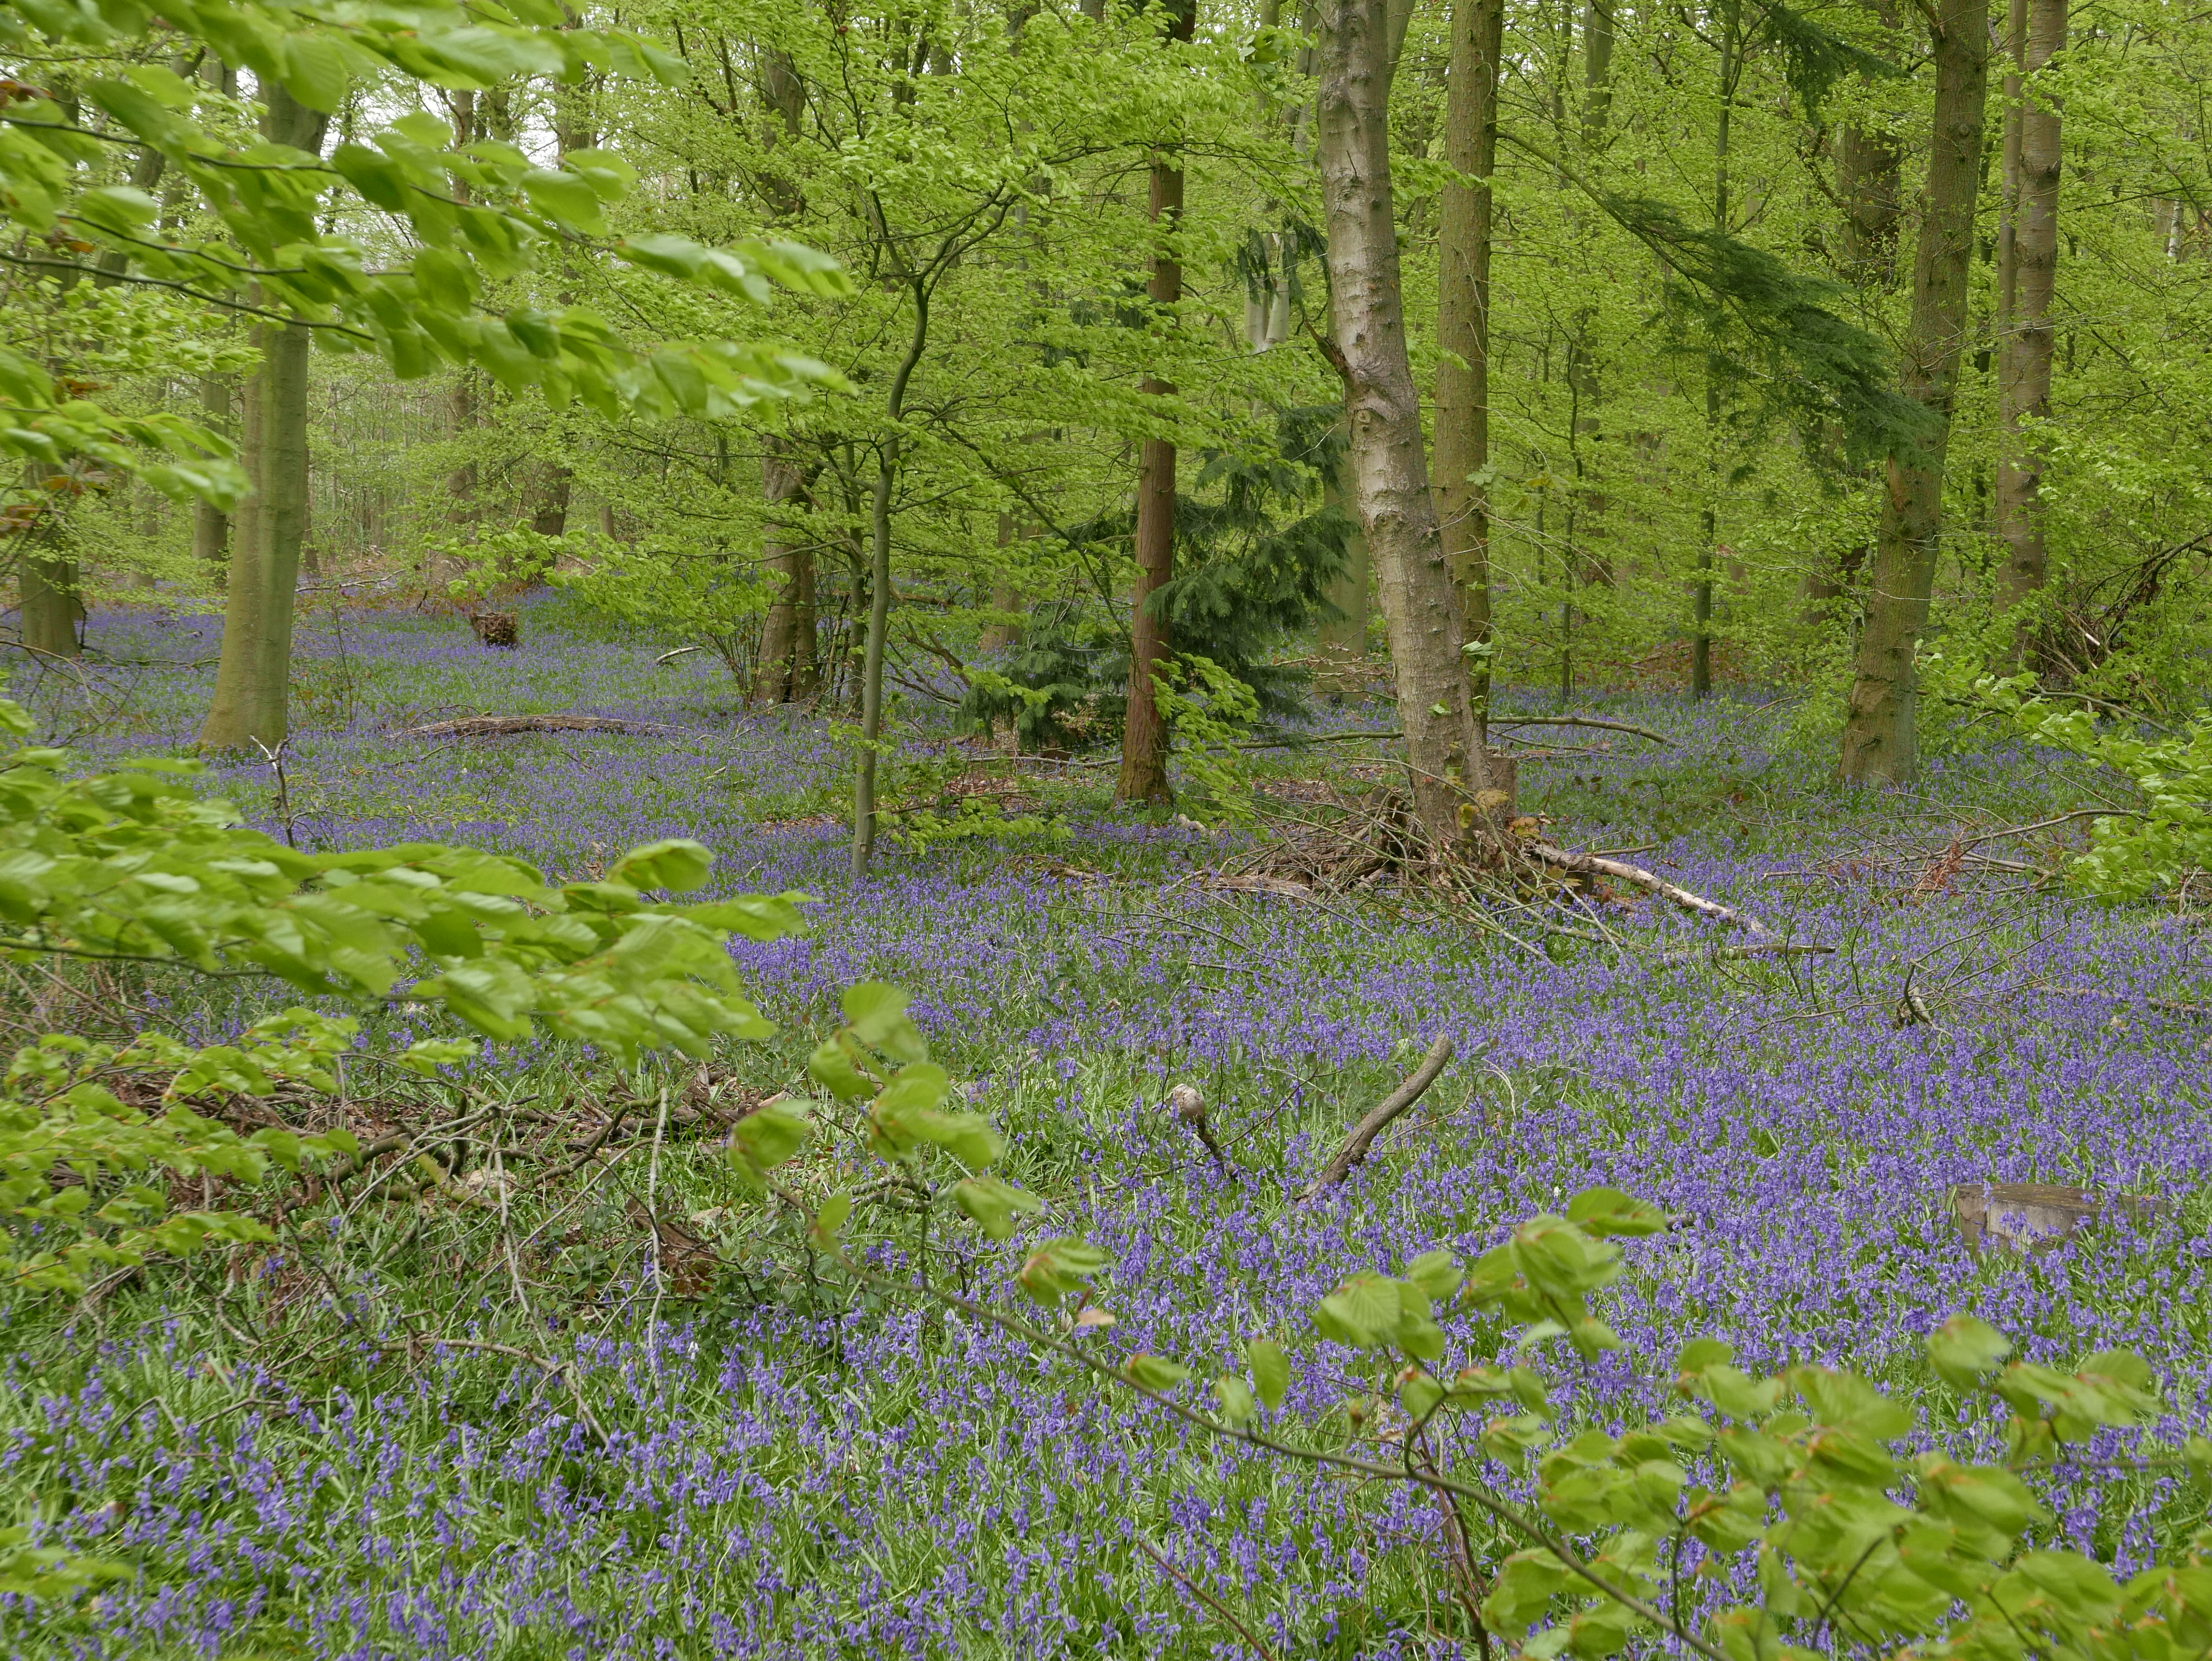 Woodland biodiversity for human health and wellbeing across Britain | School of Earth and Environment | University of Leeds